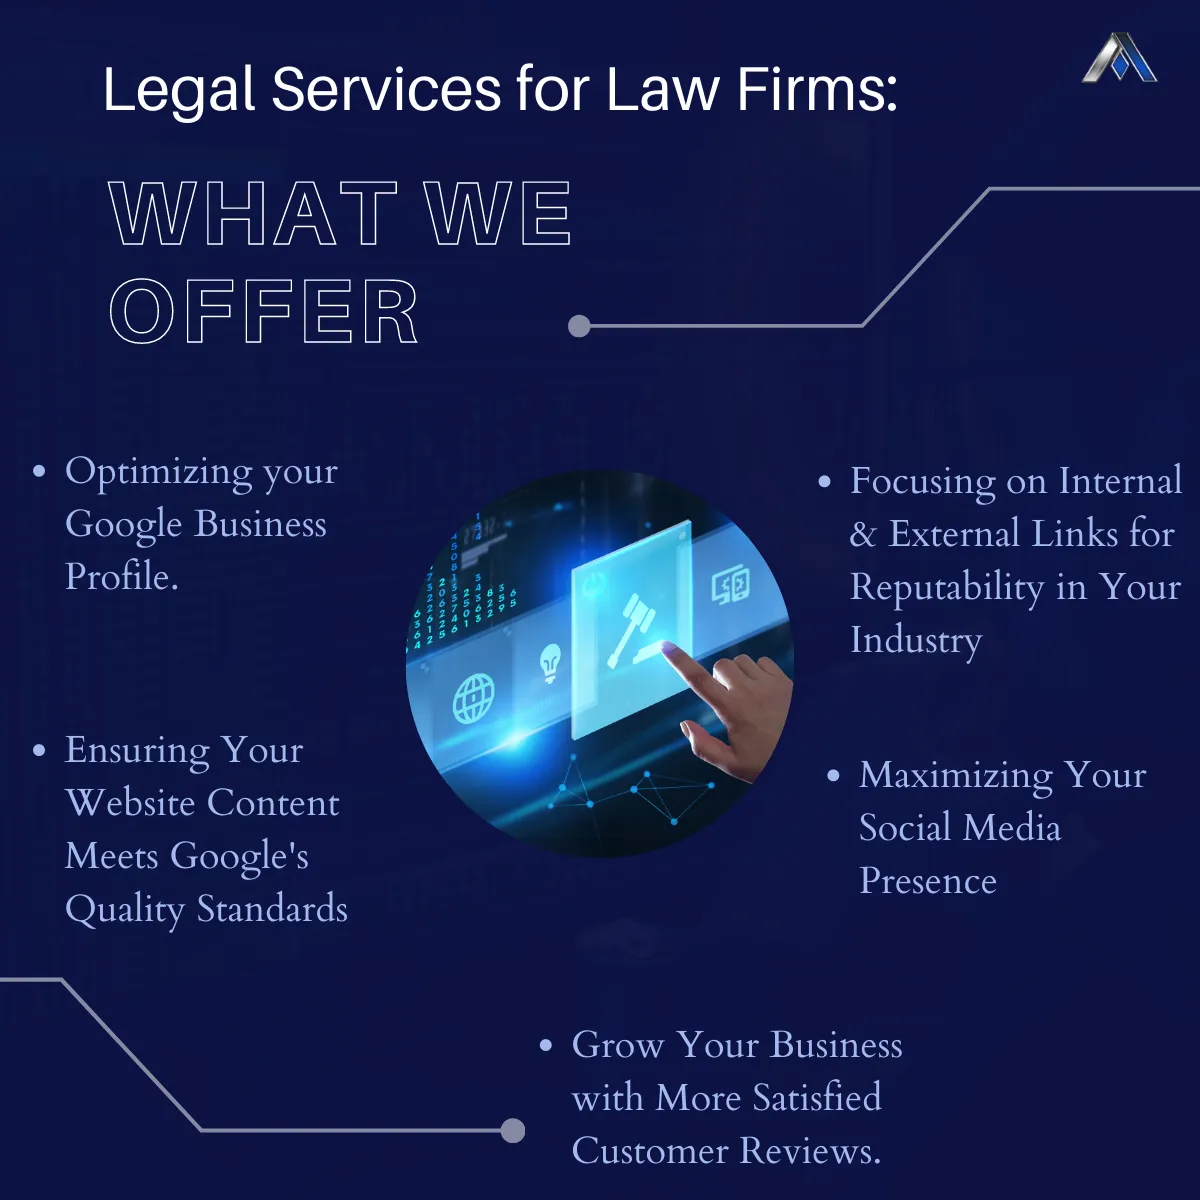 Services for law firms